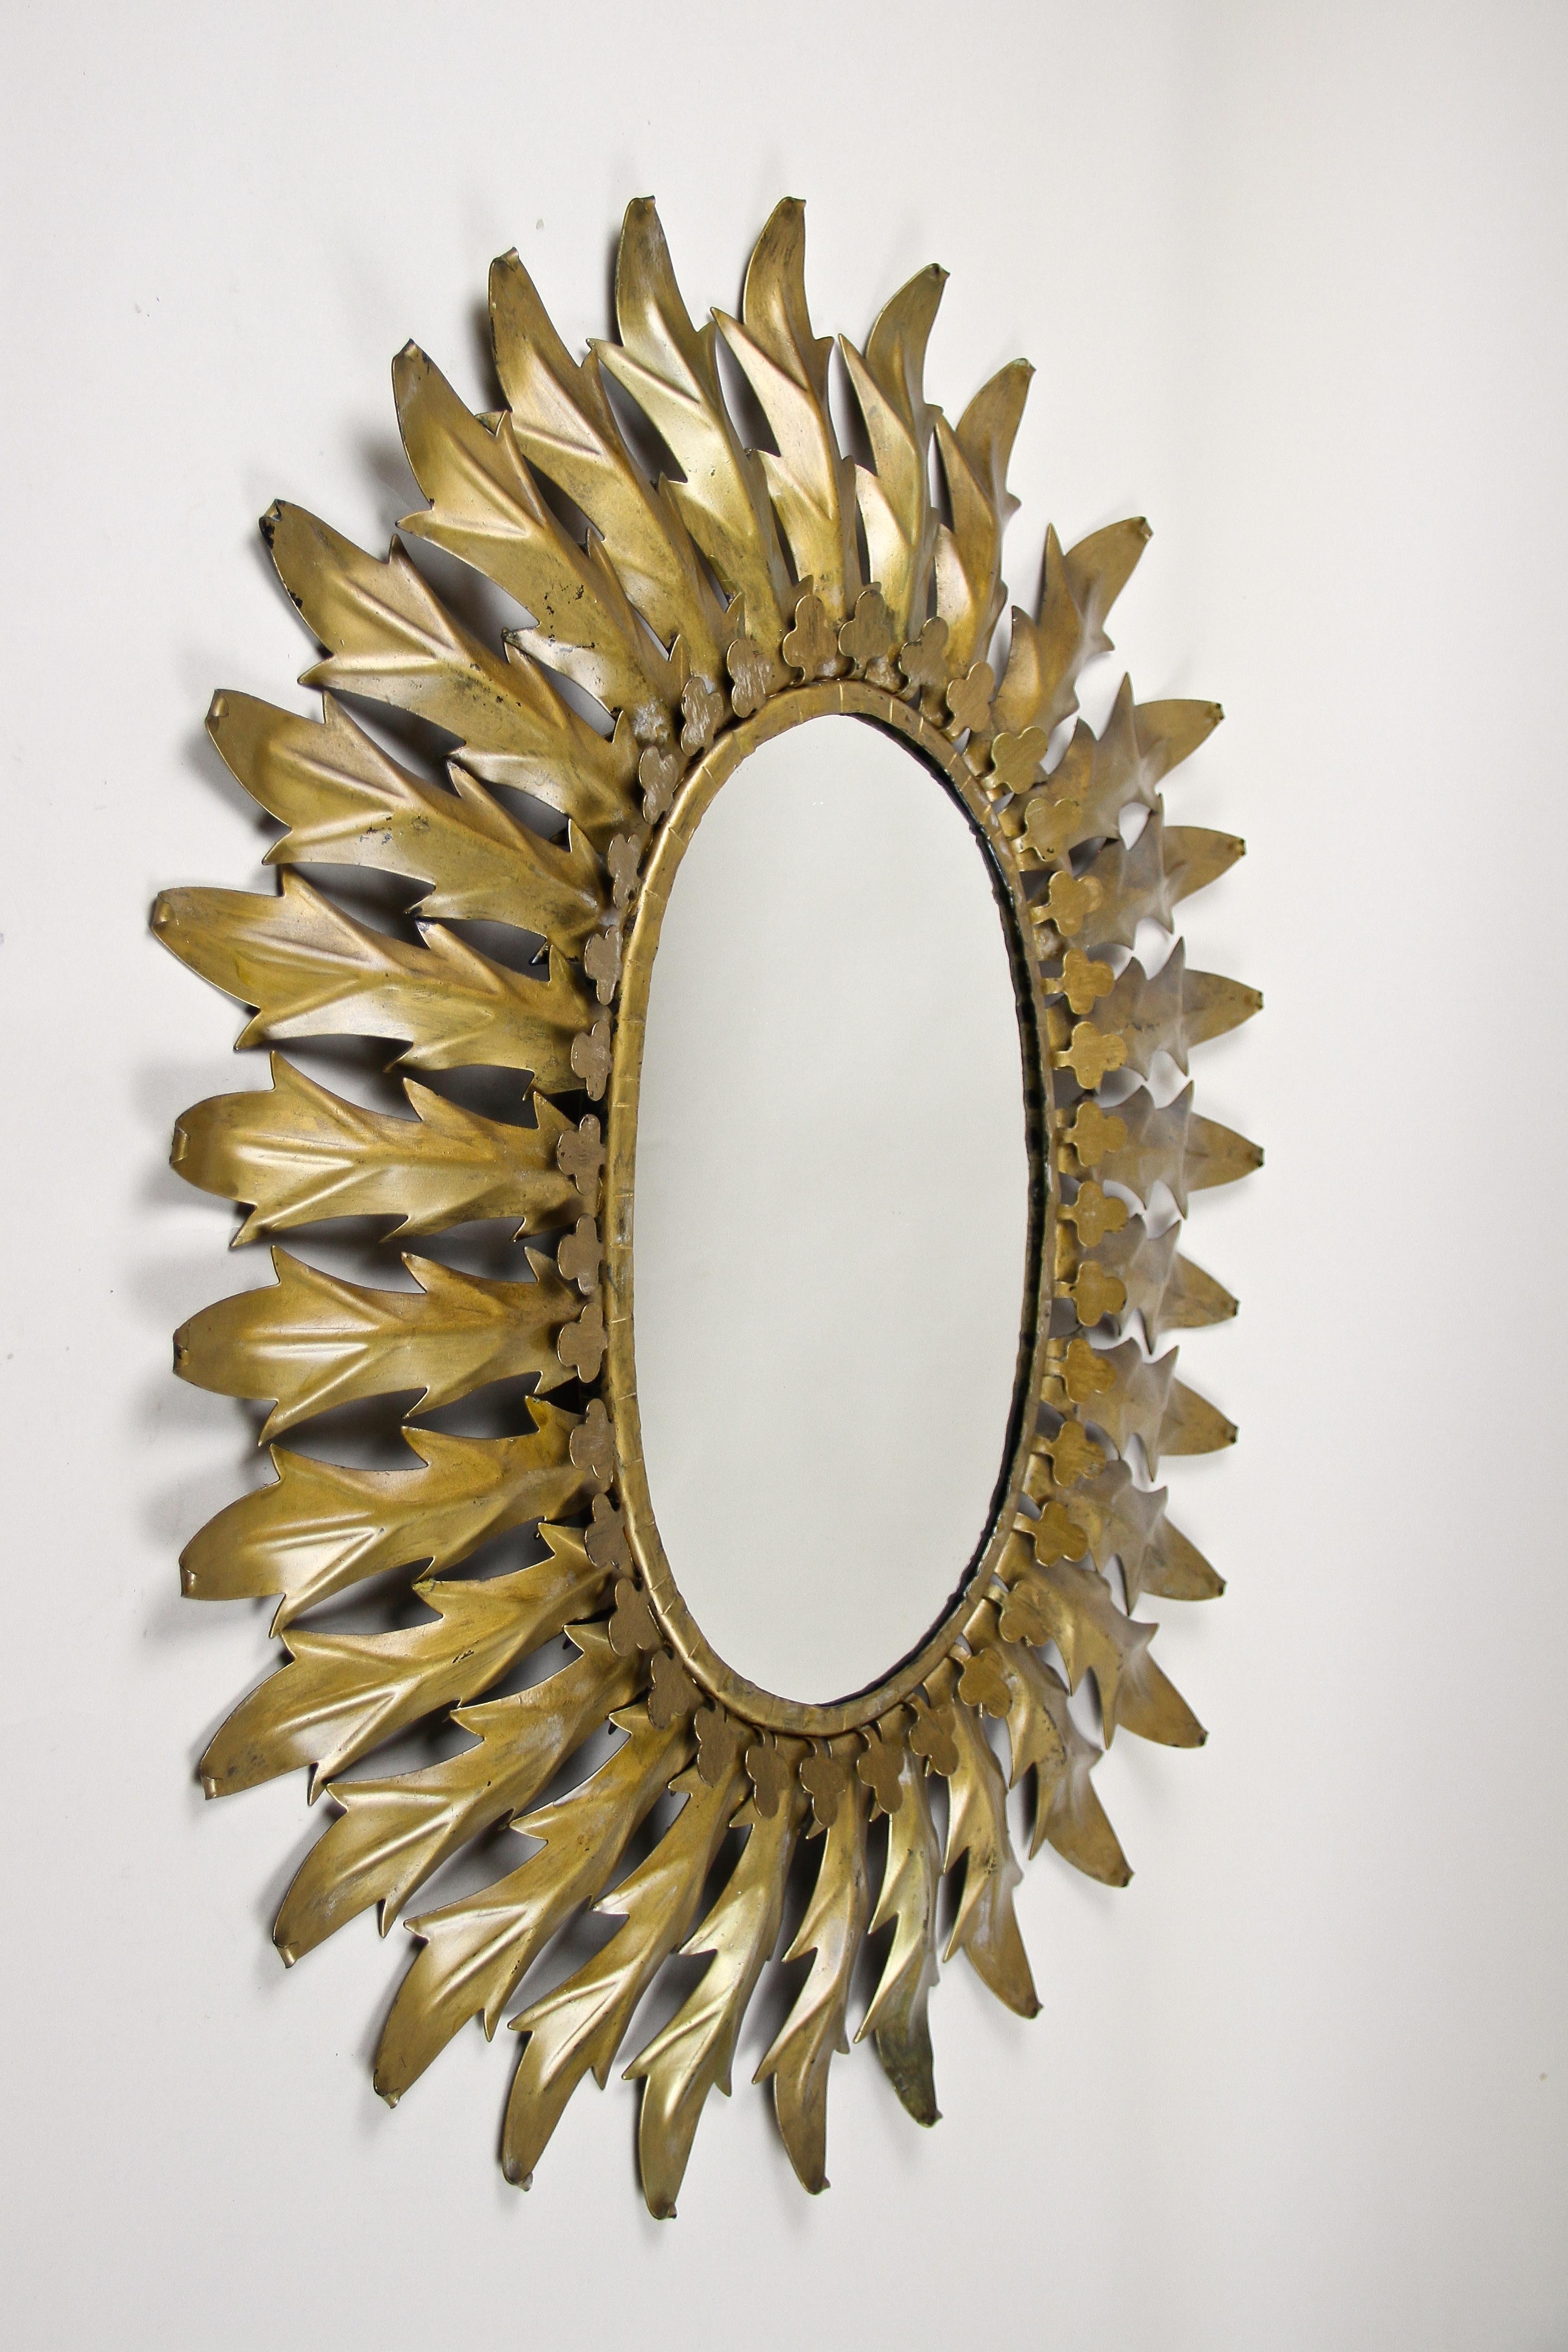 Extraordinary french Sunburst Wall Mirror from the Art Deco period around 1920. Hand crafted in the early 20th century in France this oval mirror impresses with its artfully design showing beautiful shaped large leaves made of bronzed sheet metall.